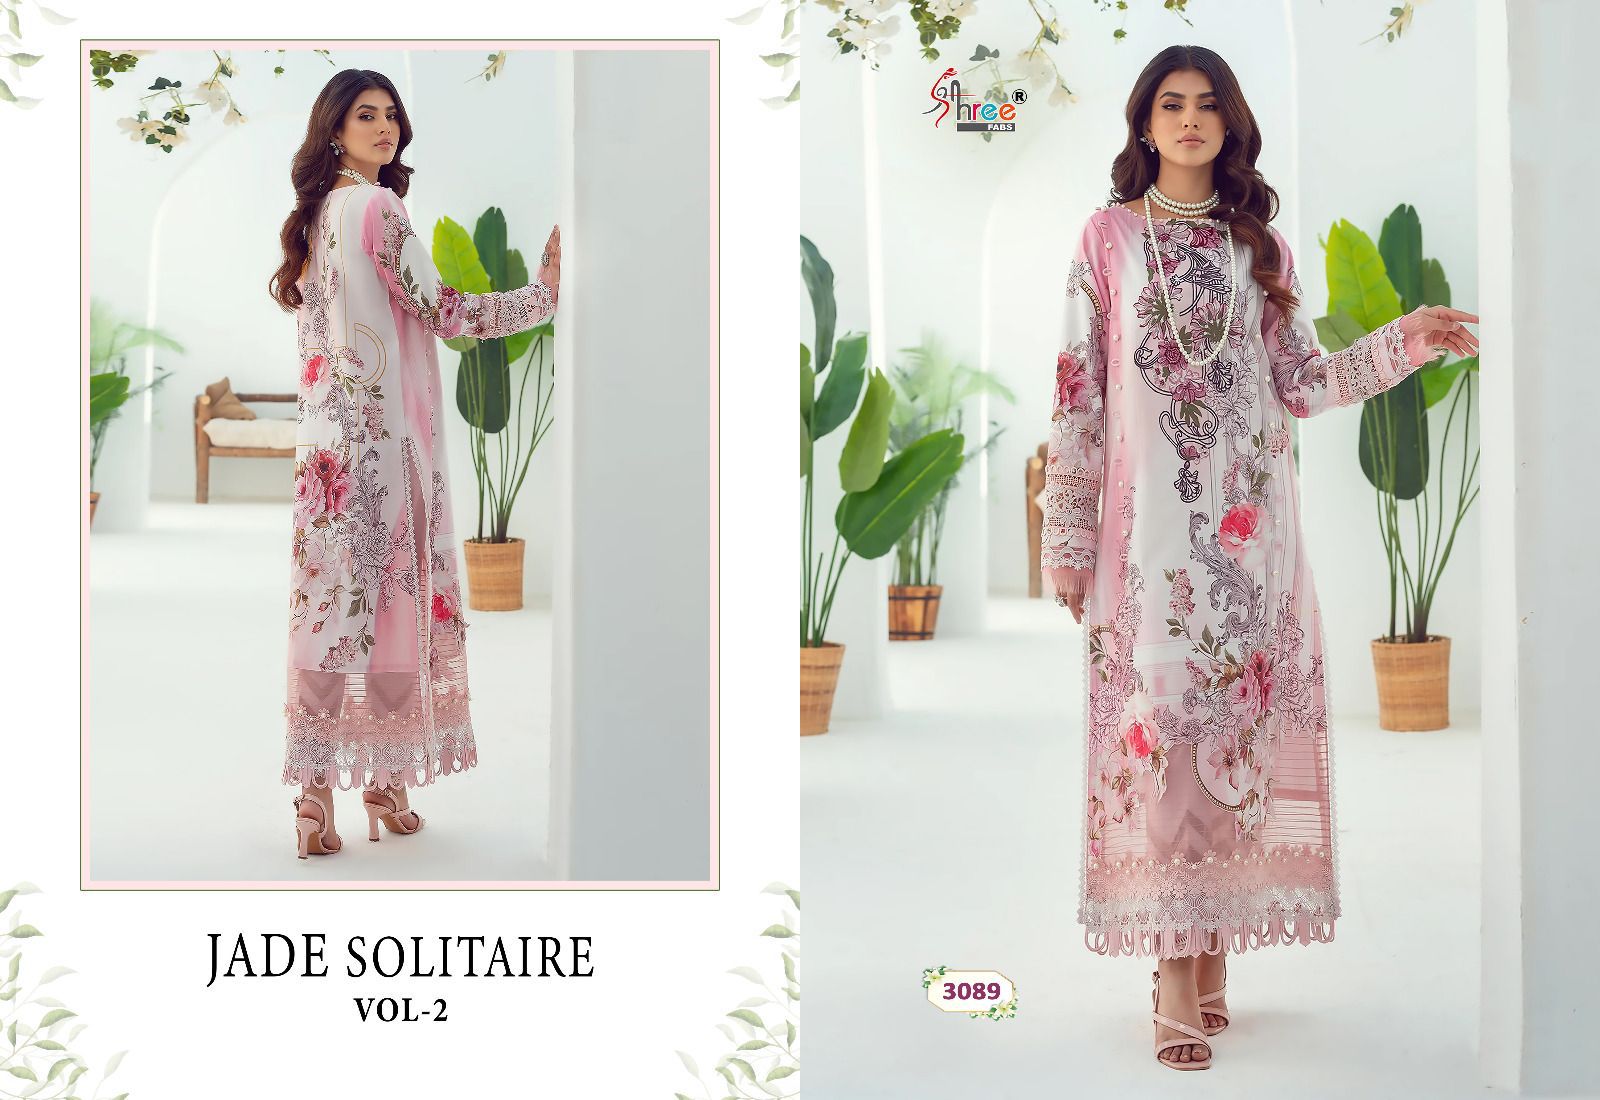 Shree Jade Solitaire Vol 2 collection 4